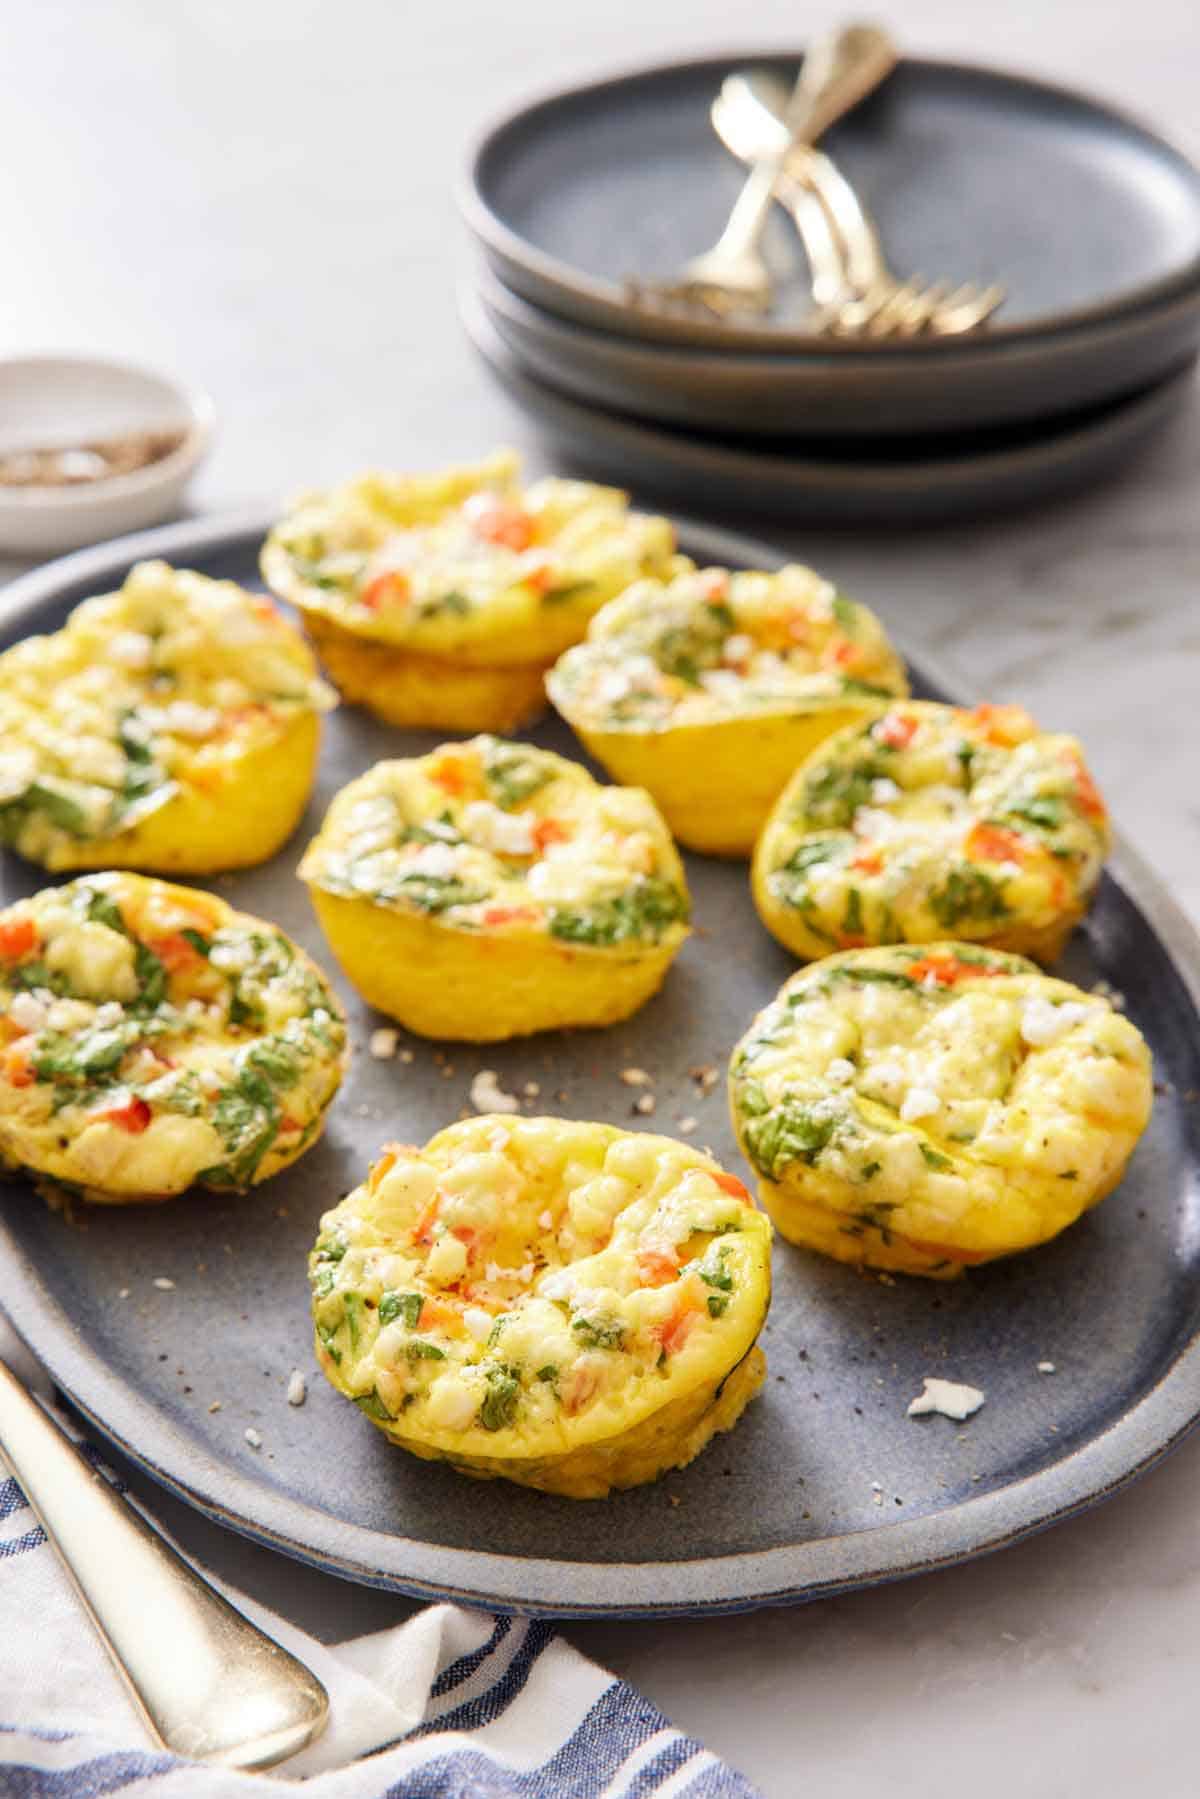 A platter of egg muffins topped with crumbled feta. Stack of plates and forks in the background.